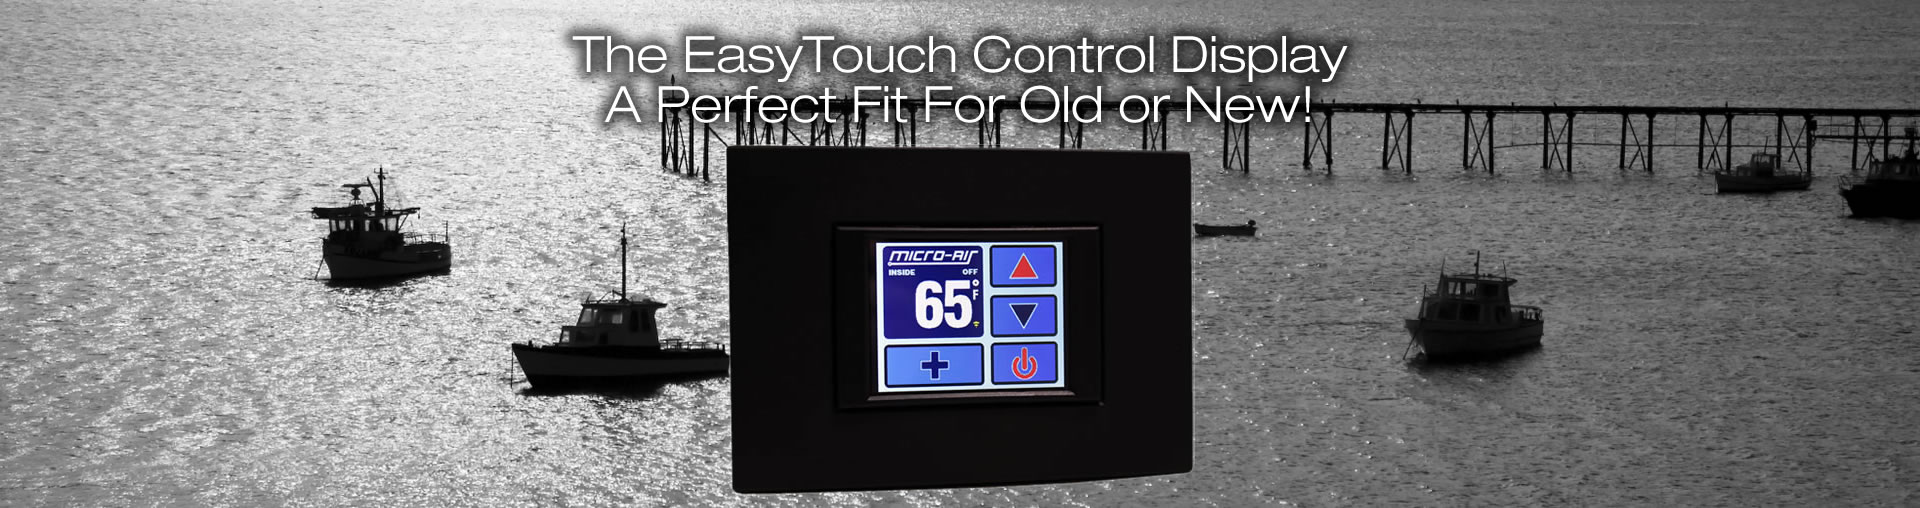 EasyTouch Marine Control Display - Touch Screen